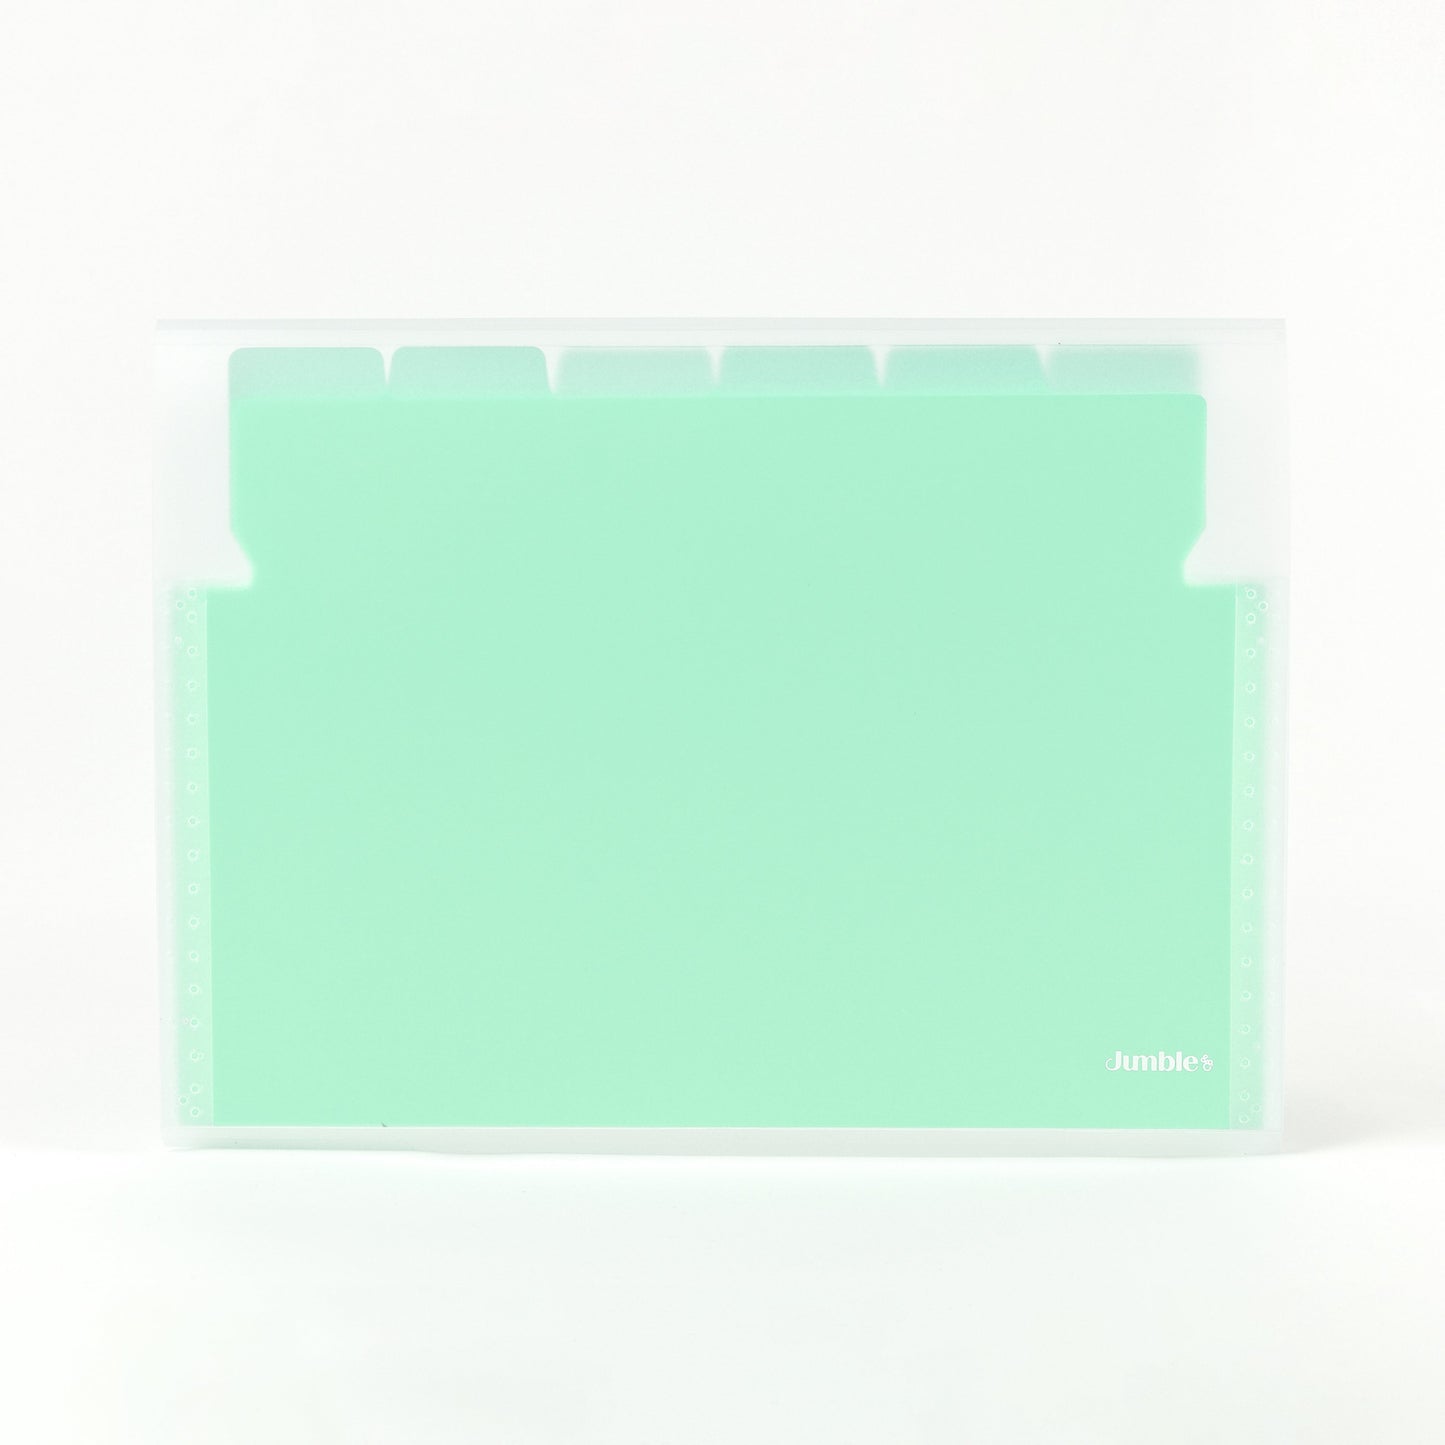 Snuggly A4 Stationery Folder - Sour Grape Teal